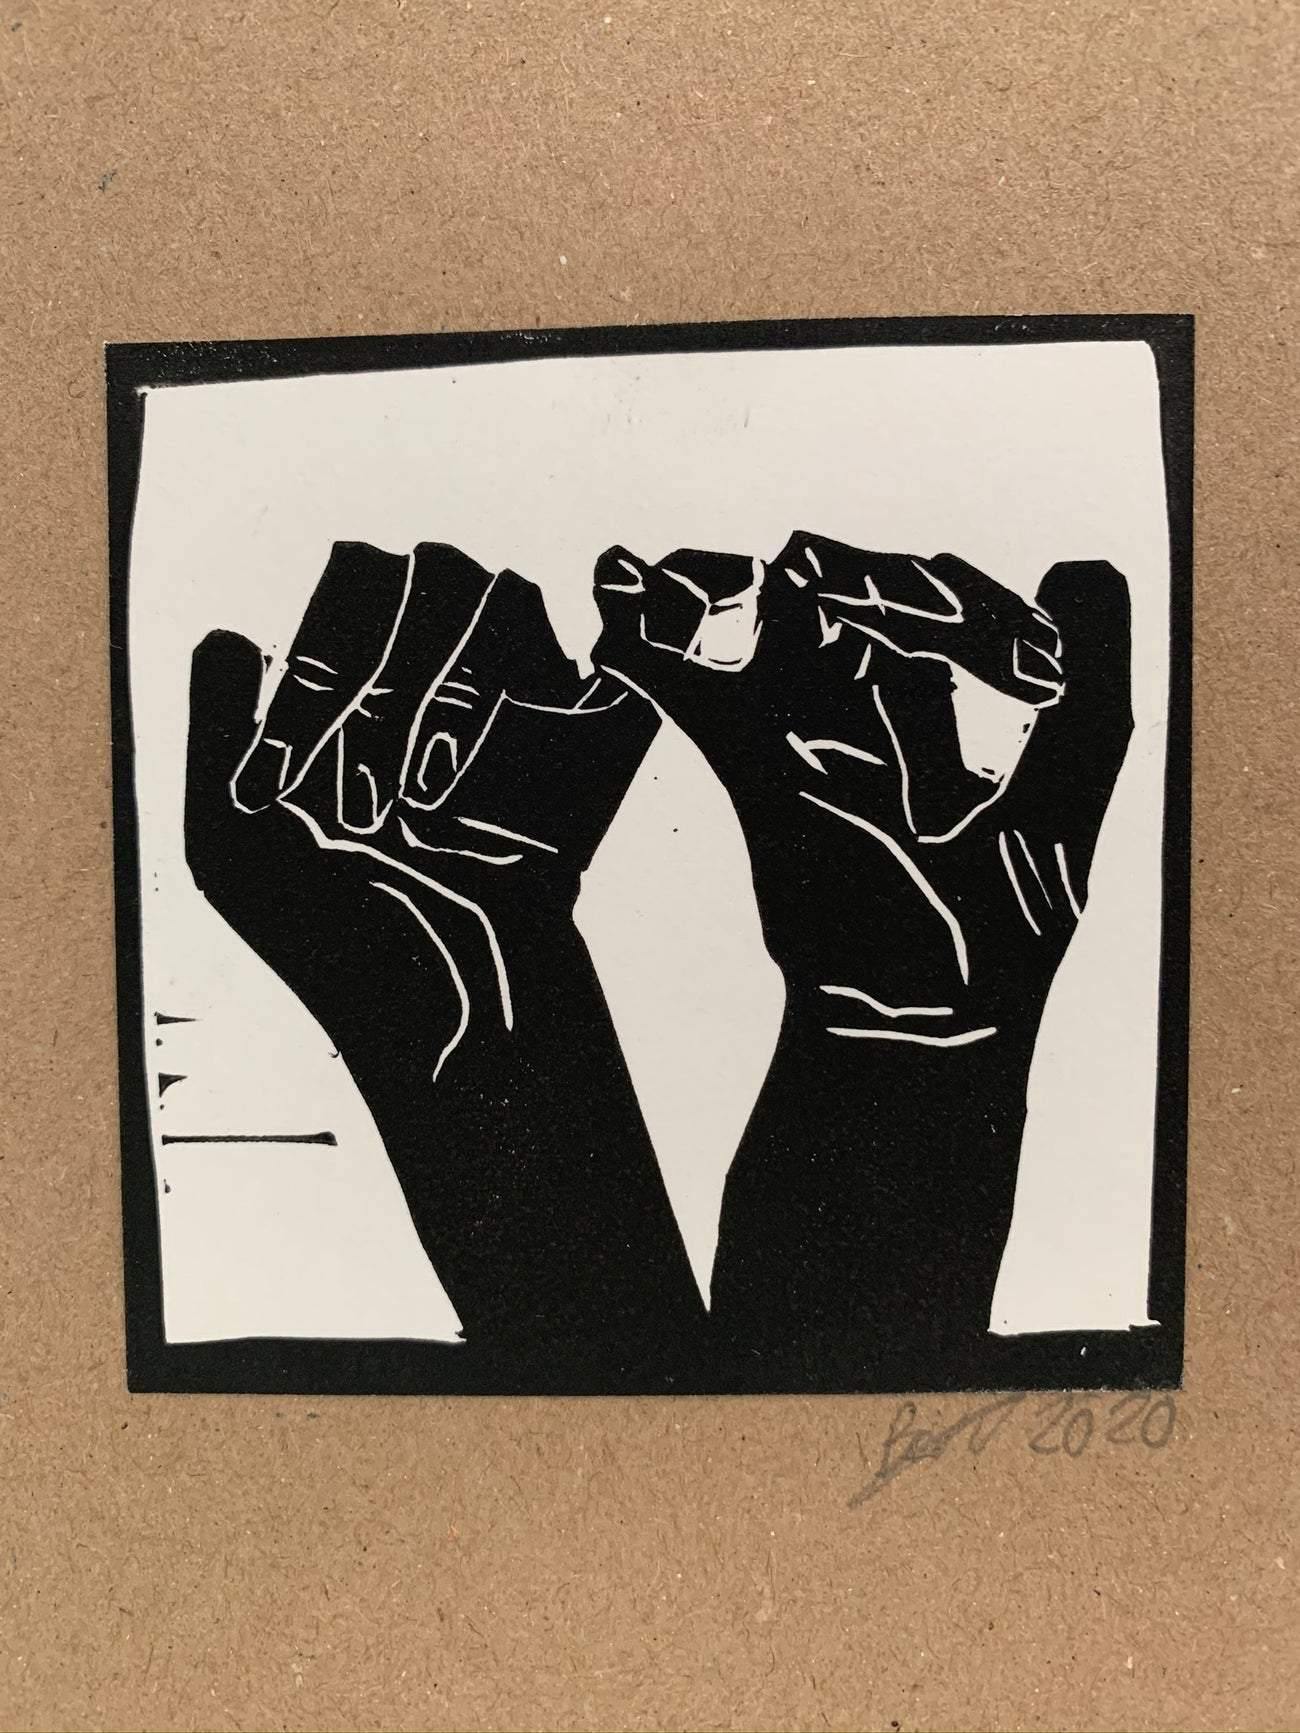 Interlocked hands illustration, hand printed image of the pinky promise symbol.